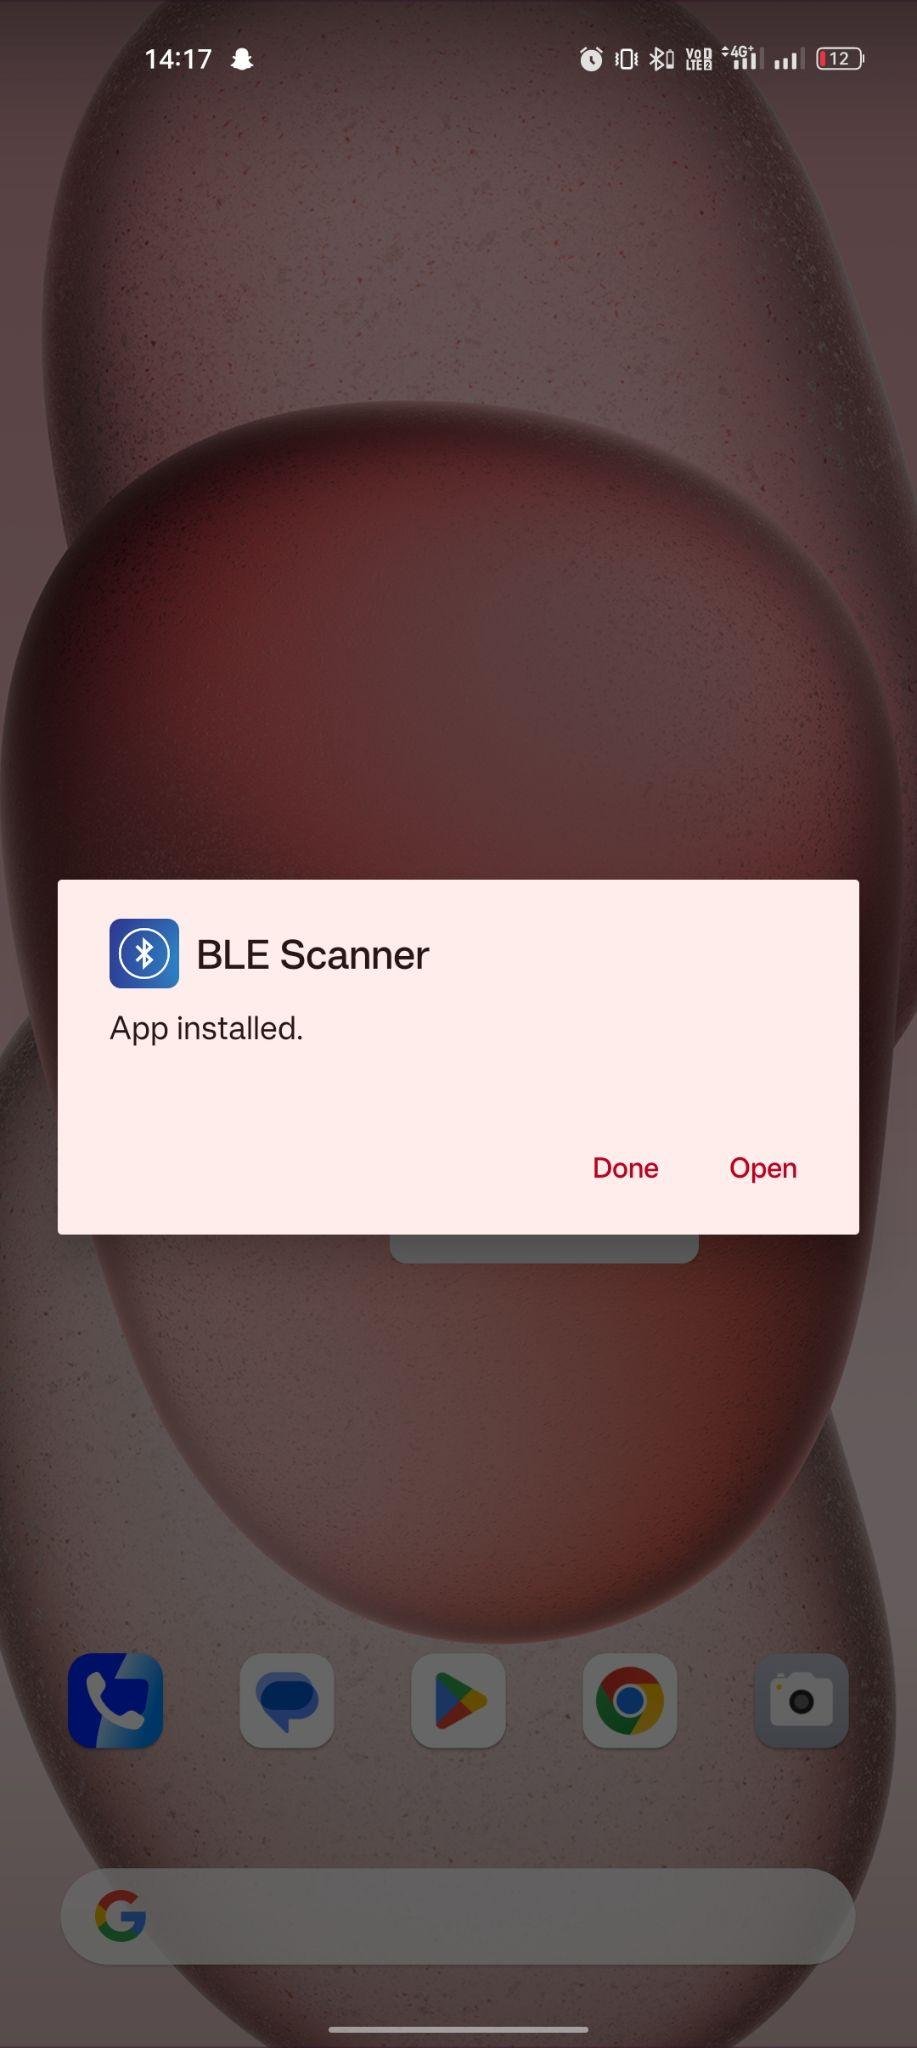 Bluetooth LE Spam apk installed